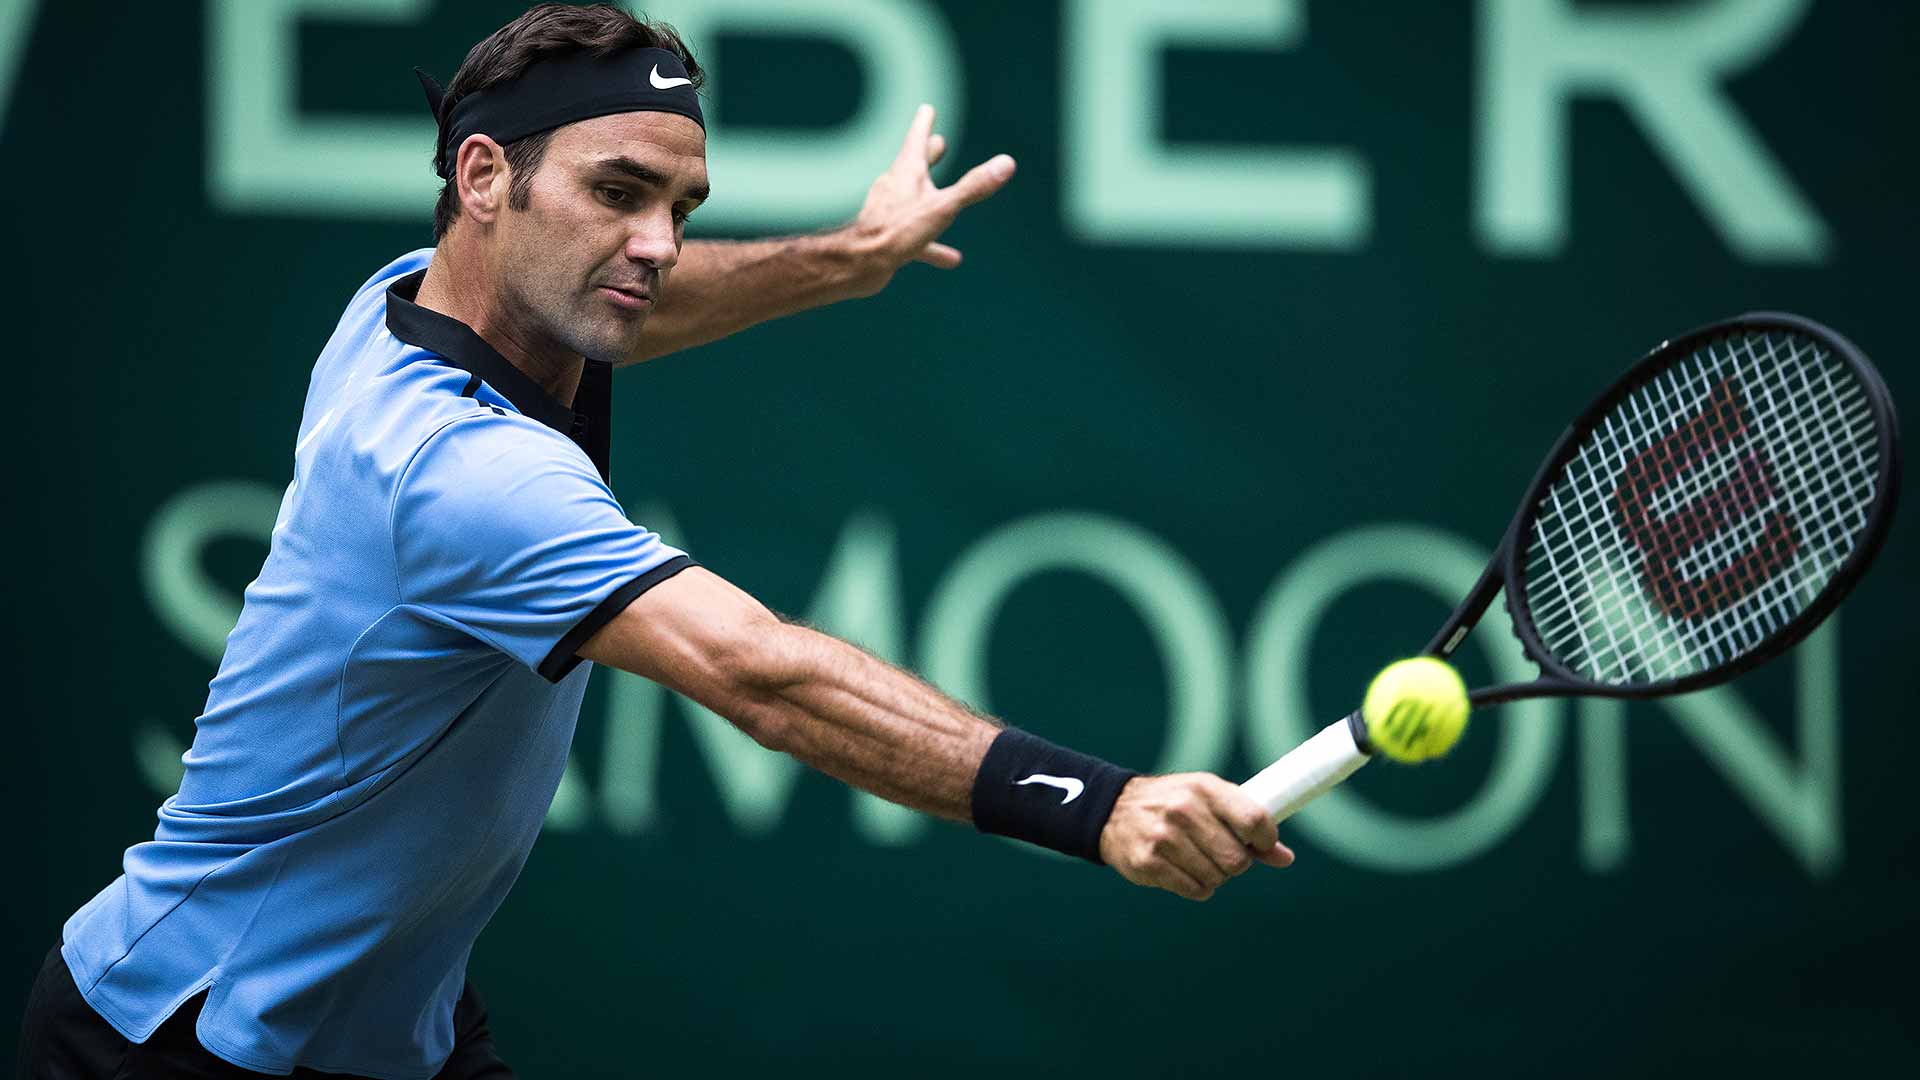 Roger Federer tries to win his ninth title at the Gerry Weber Open in Halle.